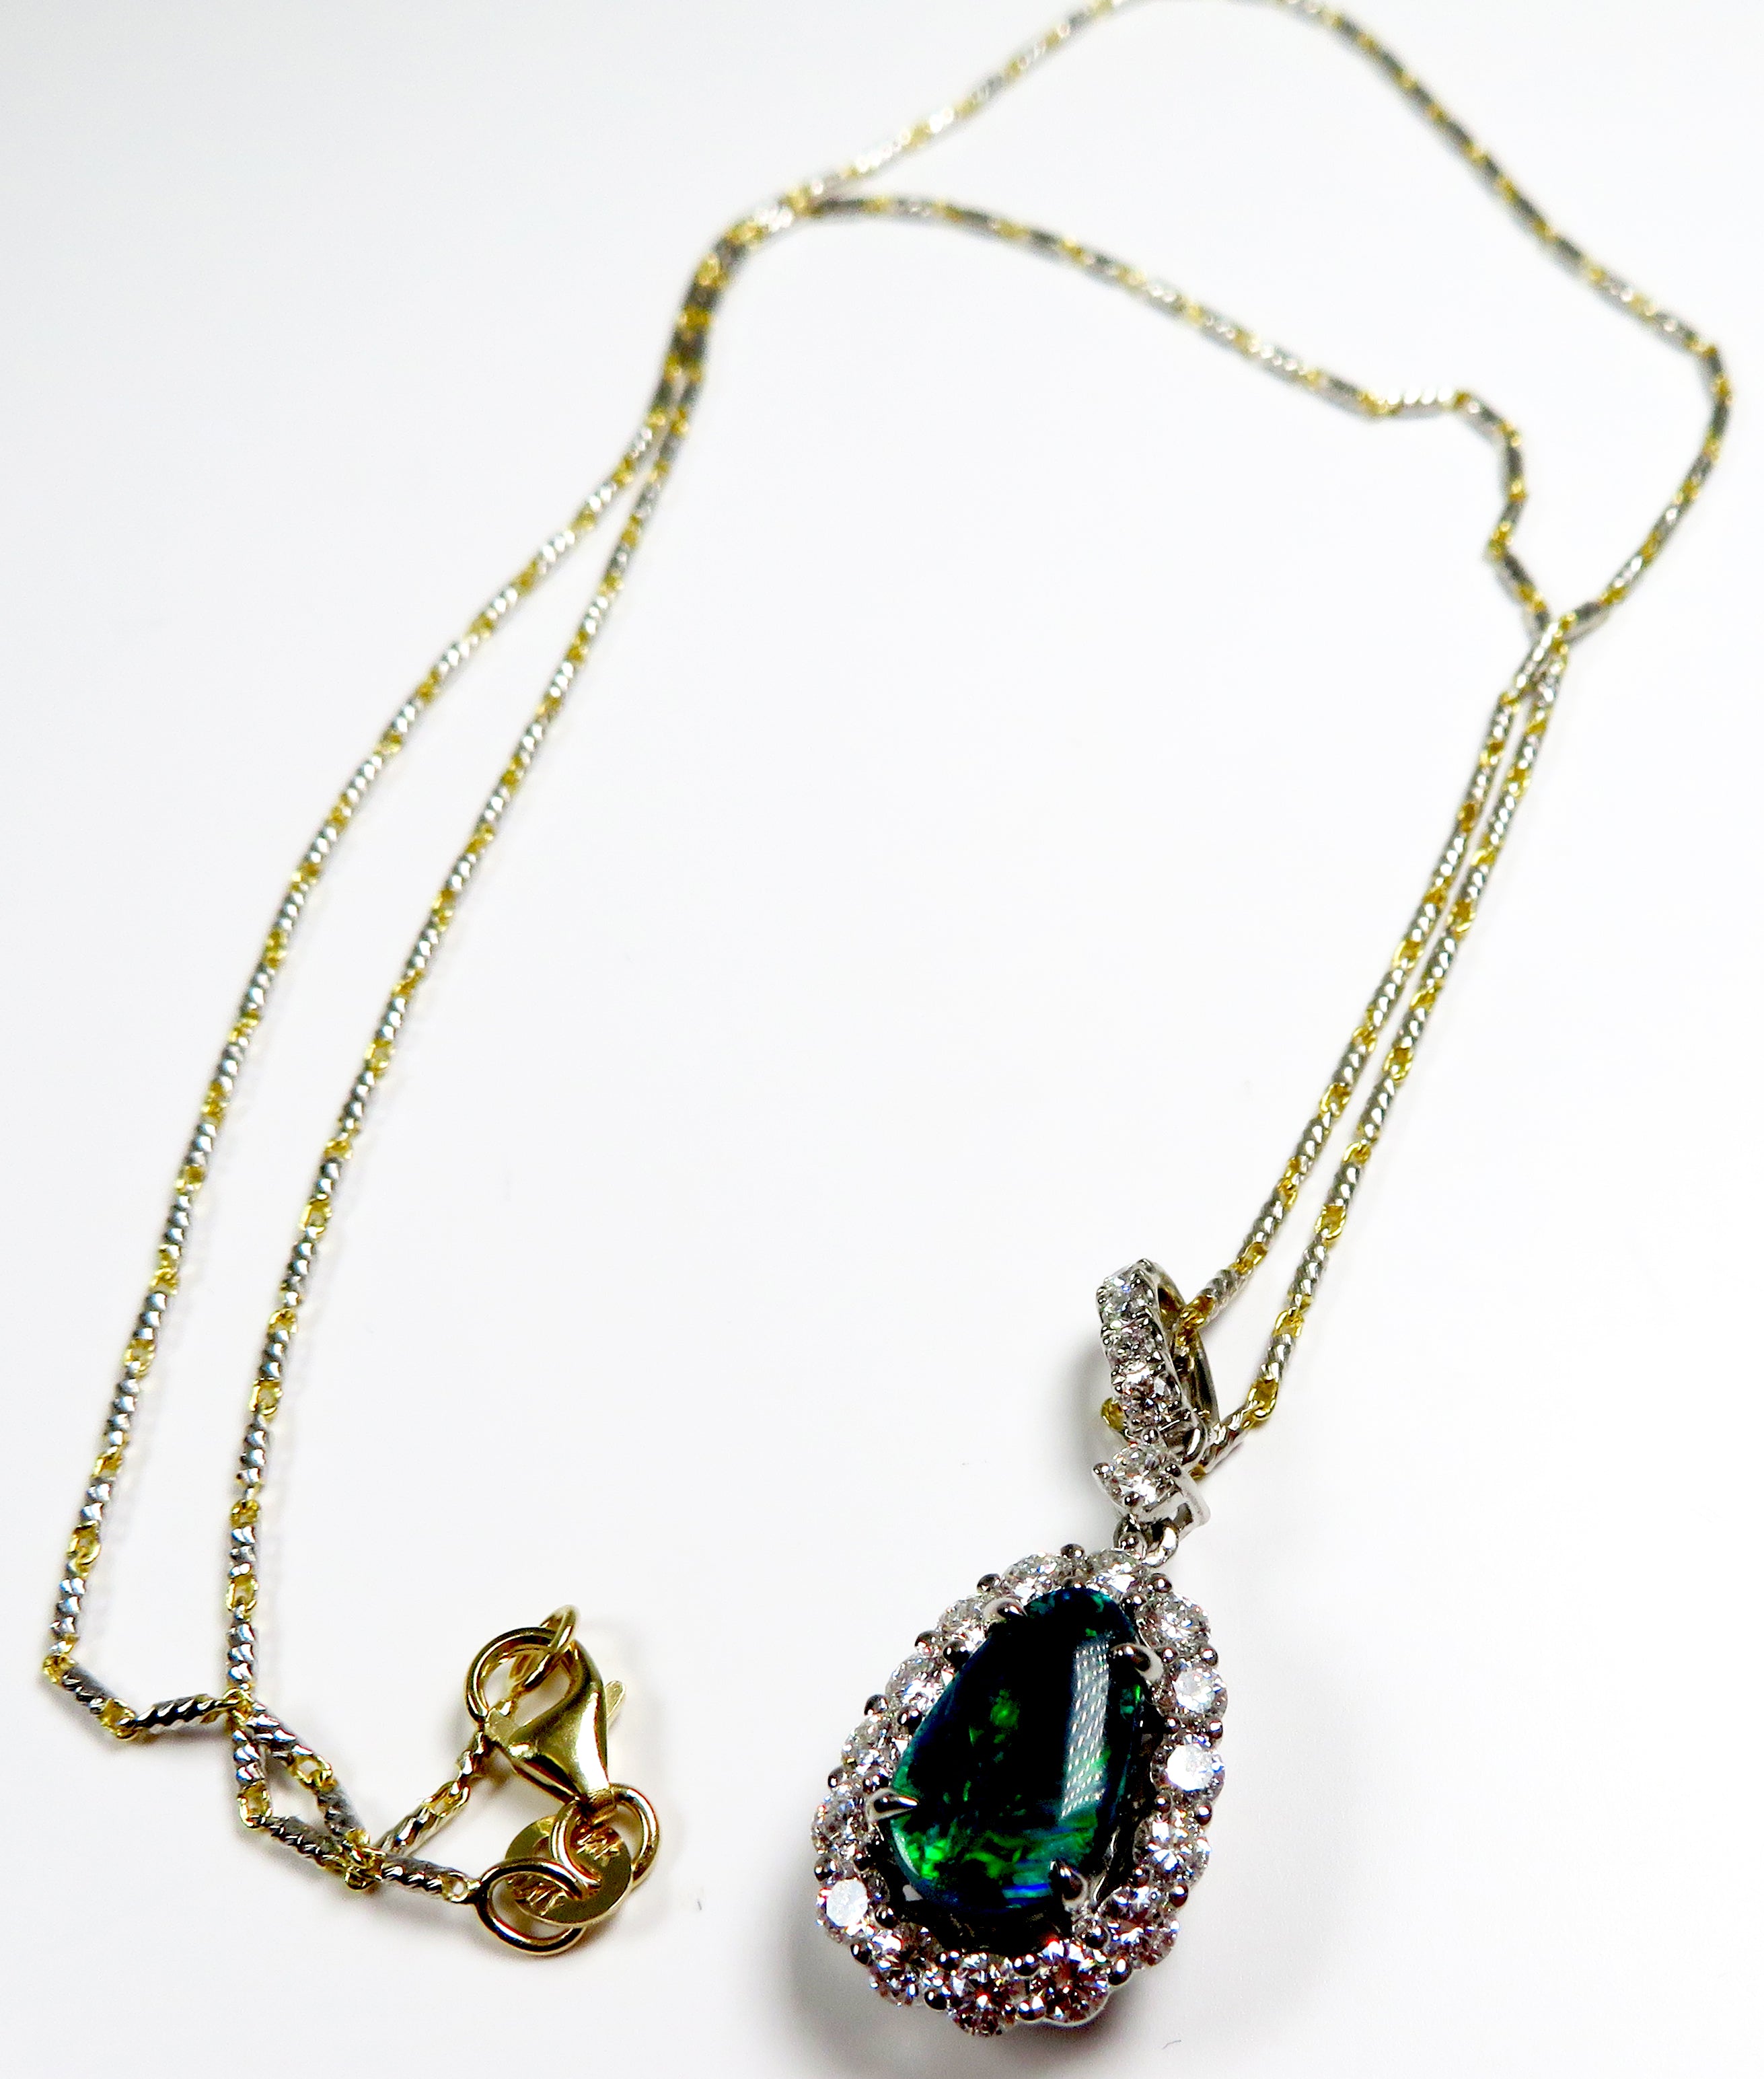 Platinum and 1.52ct Black Opal Pendant on a 14kt Two-Tone Link Chain